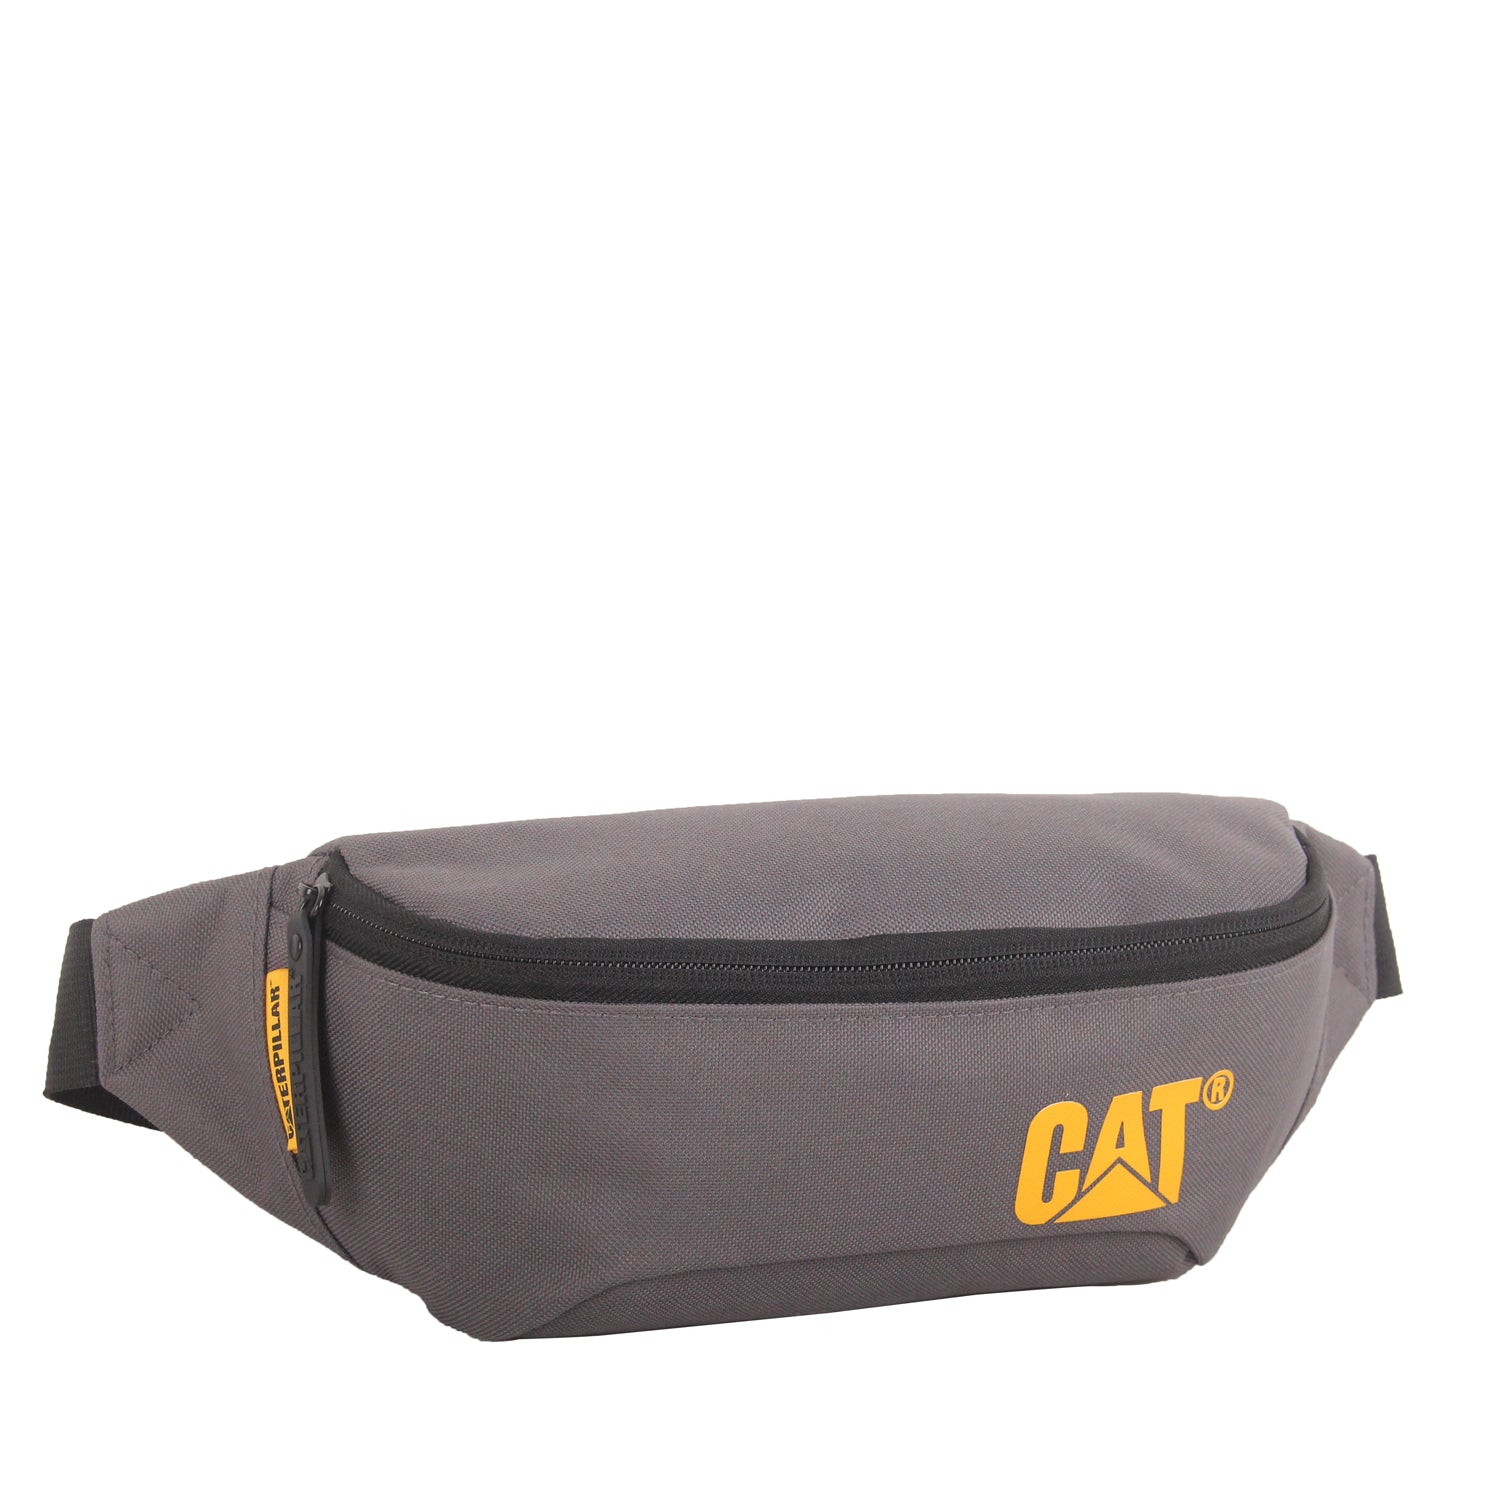 CAT - 83615-06 PROJECT waist bag -Anthracite